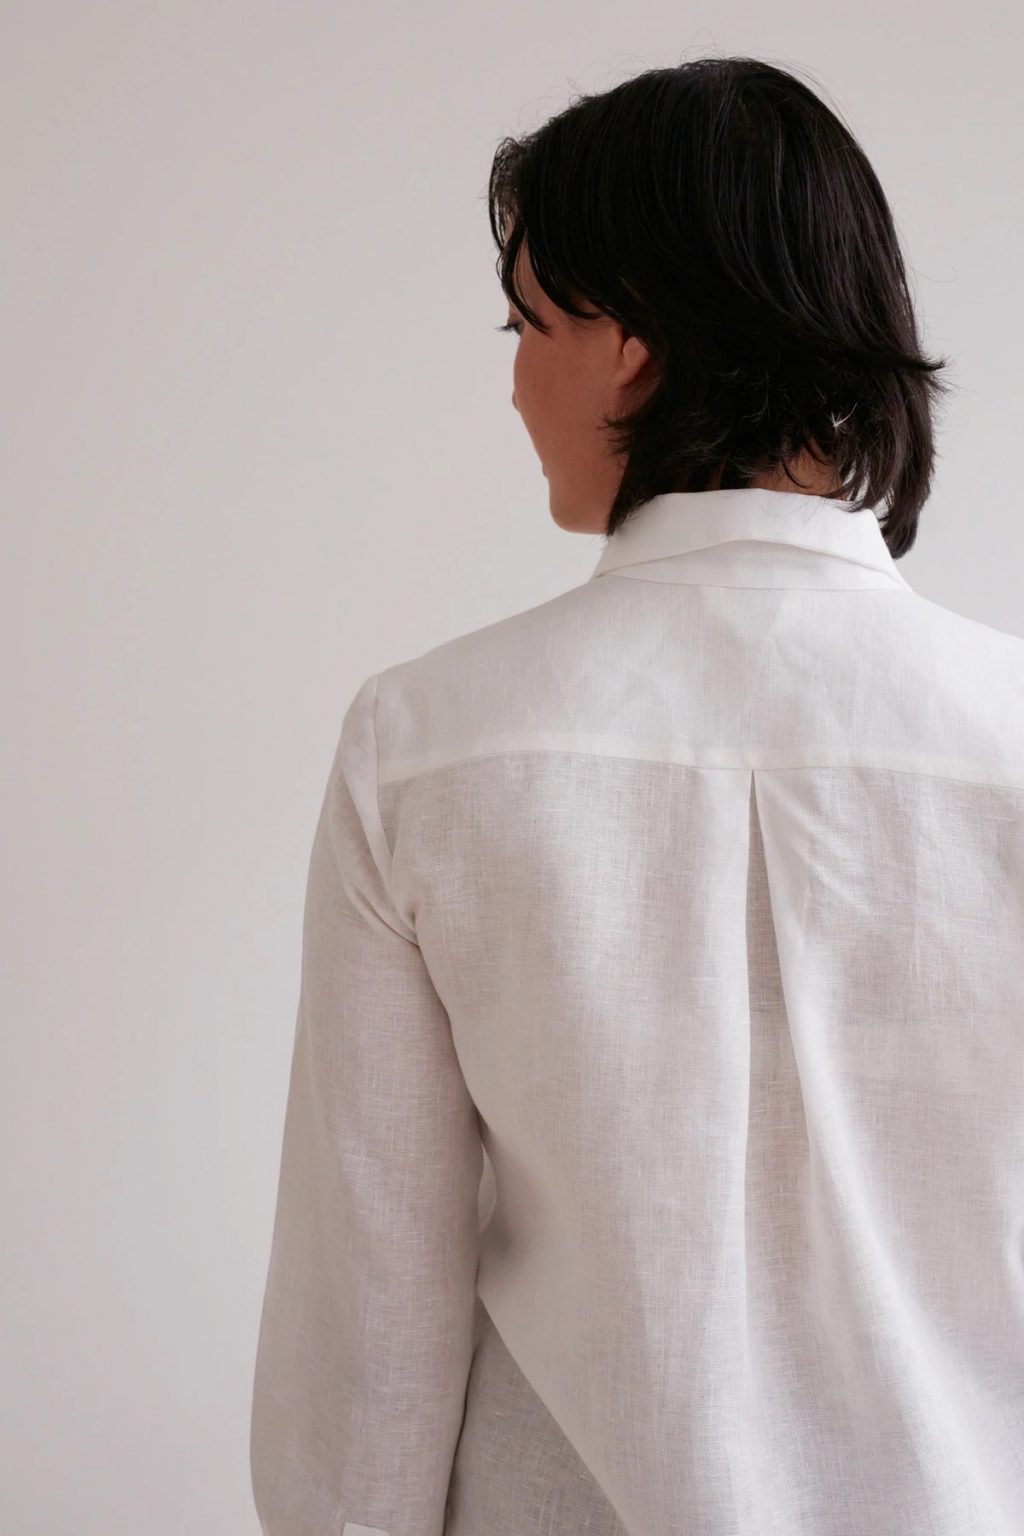 The Modern Sewing Co. Classic Shirt - The Fold Line